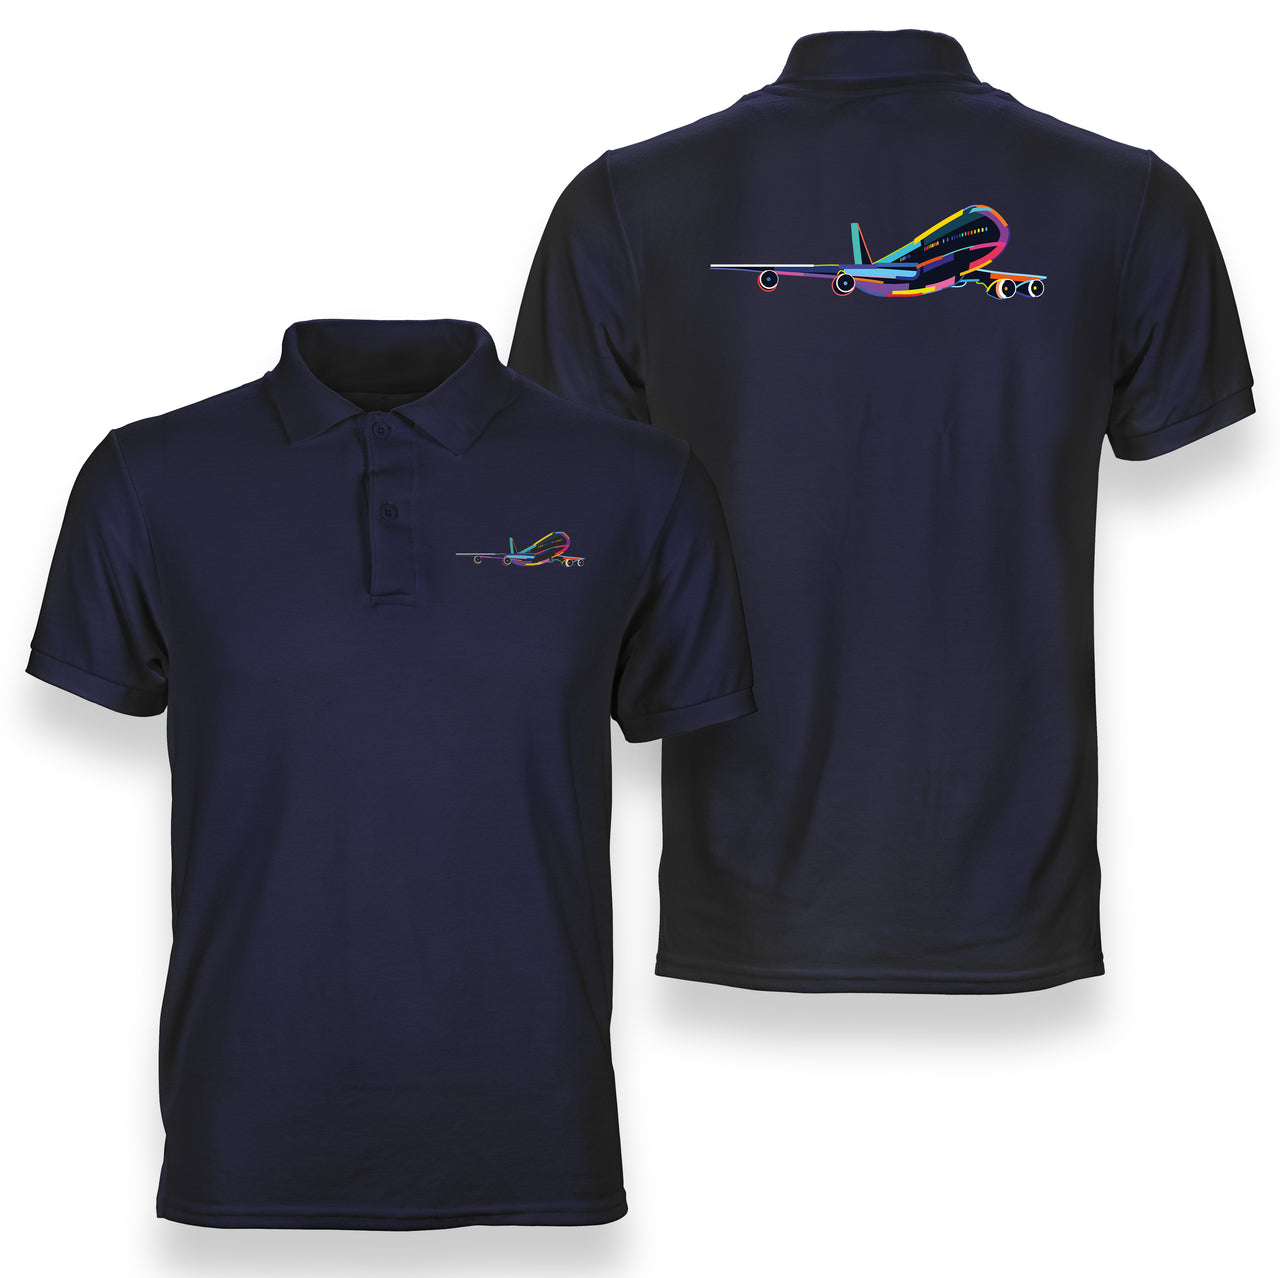 Multicolor Airplane Designed Double Side Polo T-Shirts